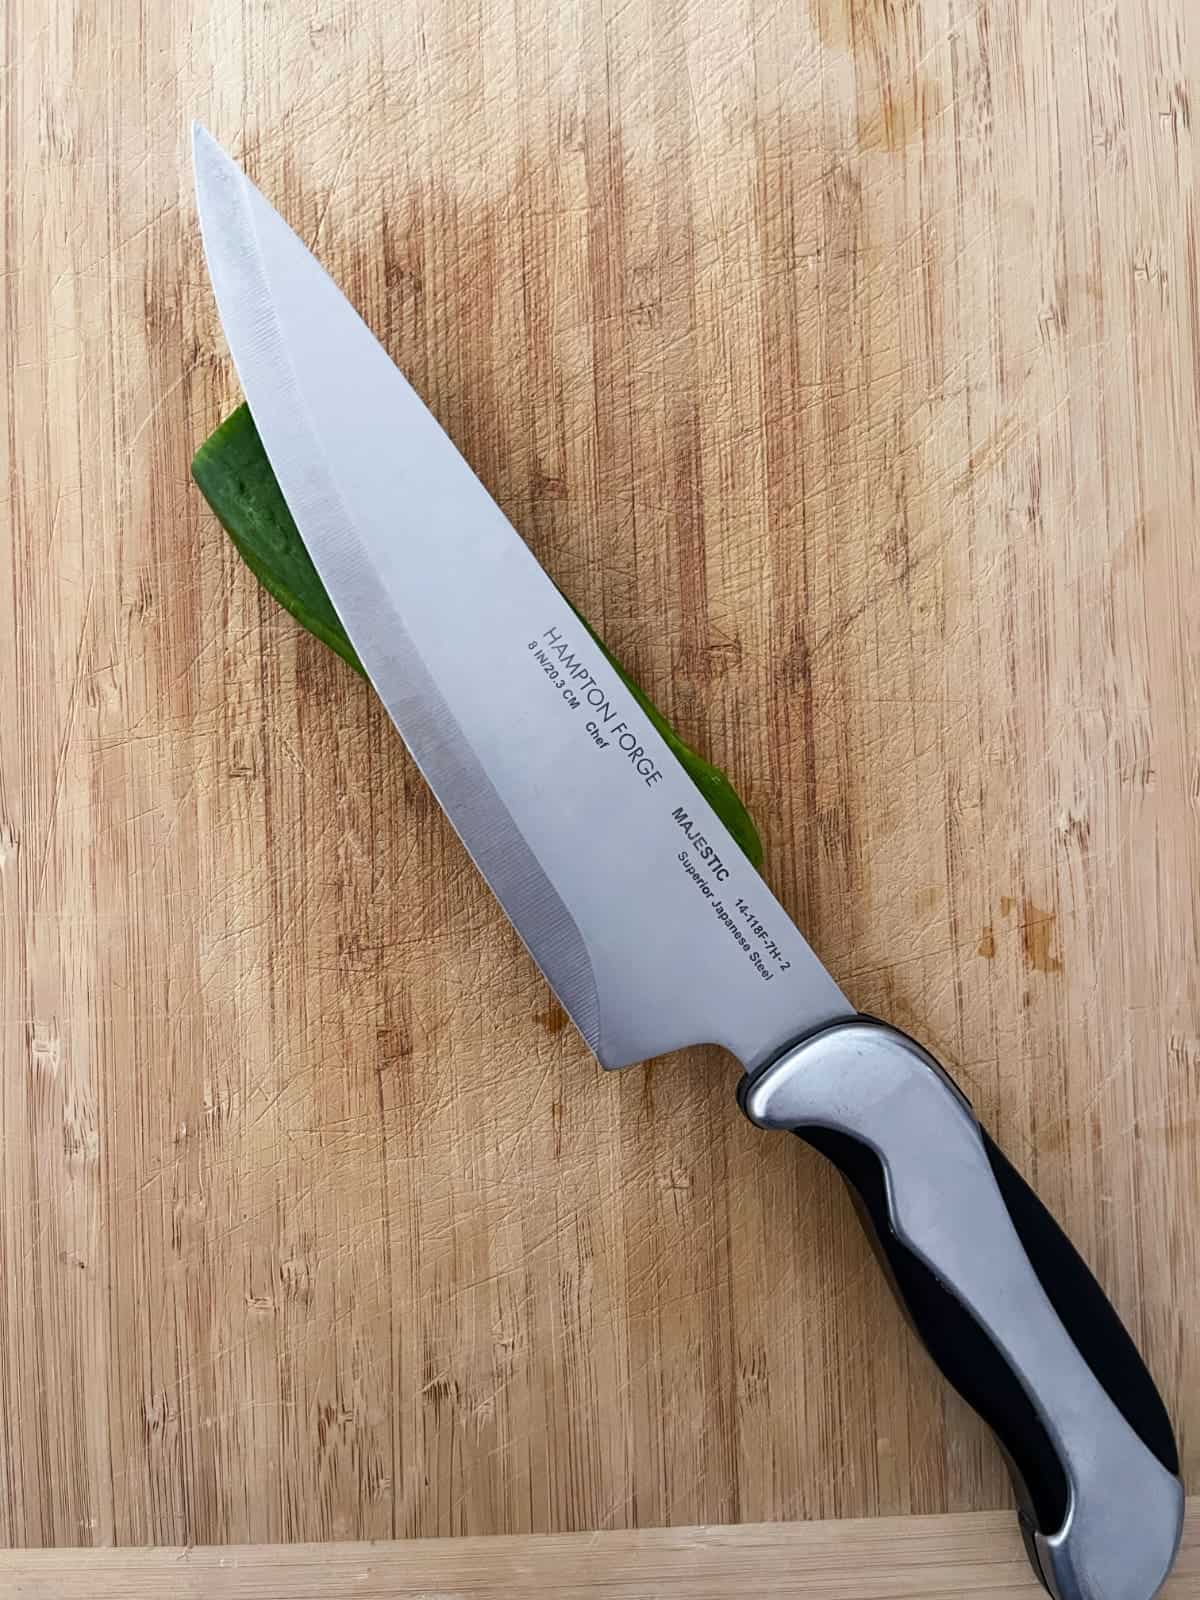 Chef knife on top of mini cucumber on wooden cutting board.